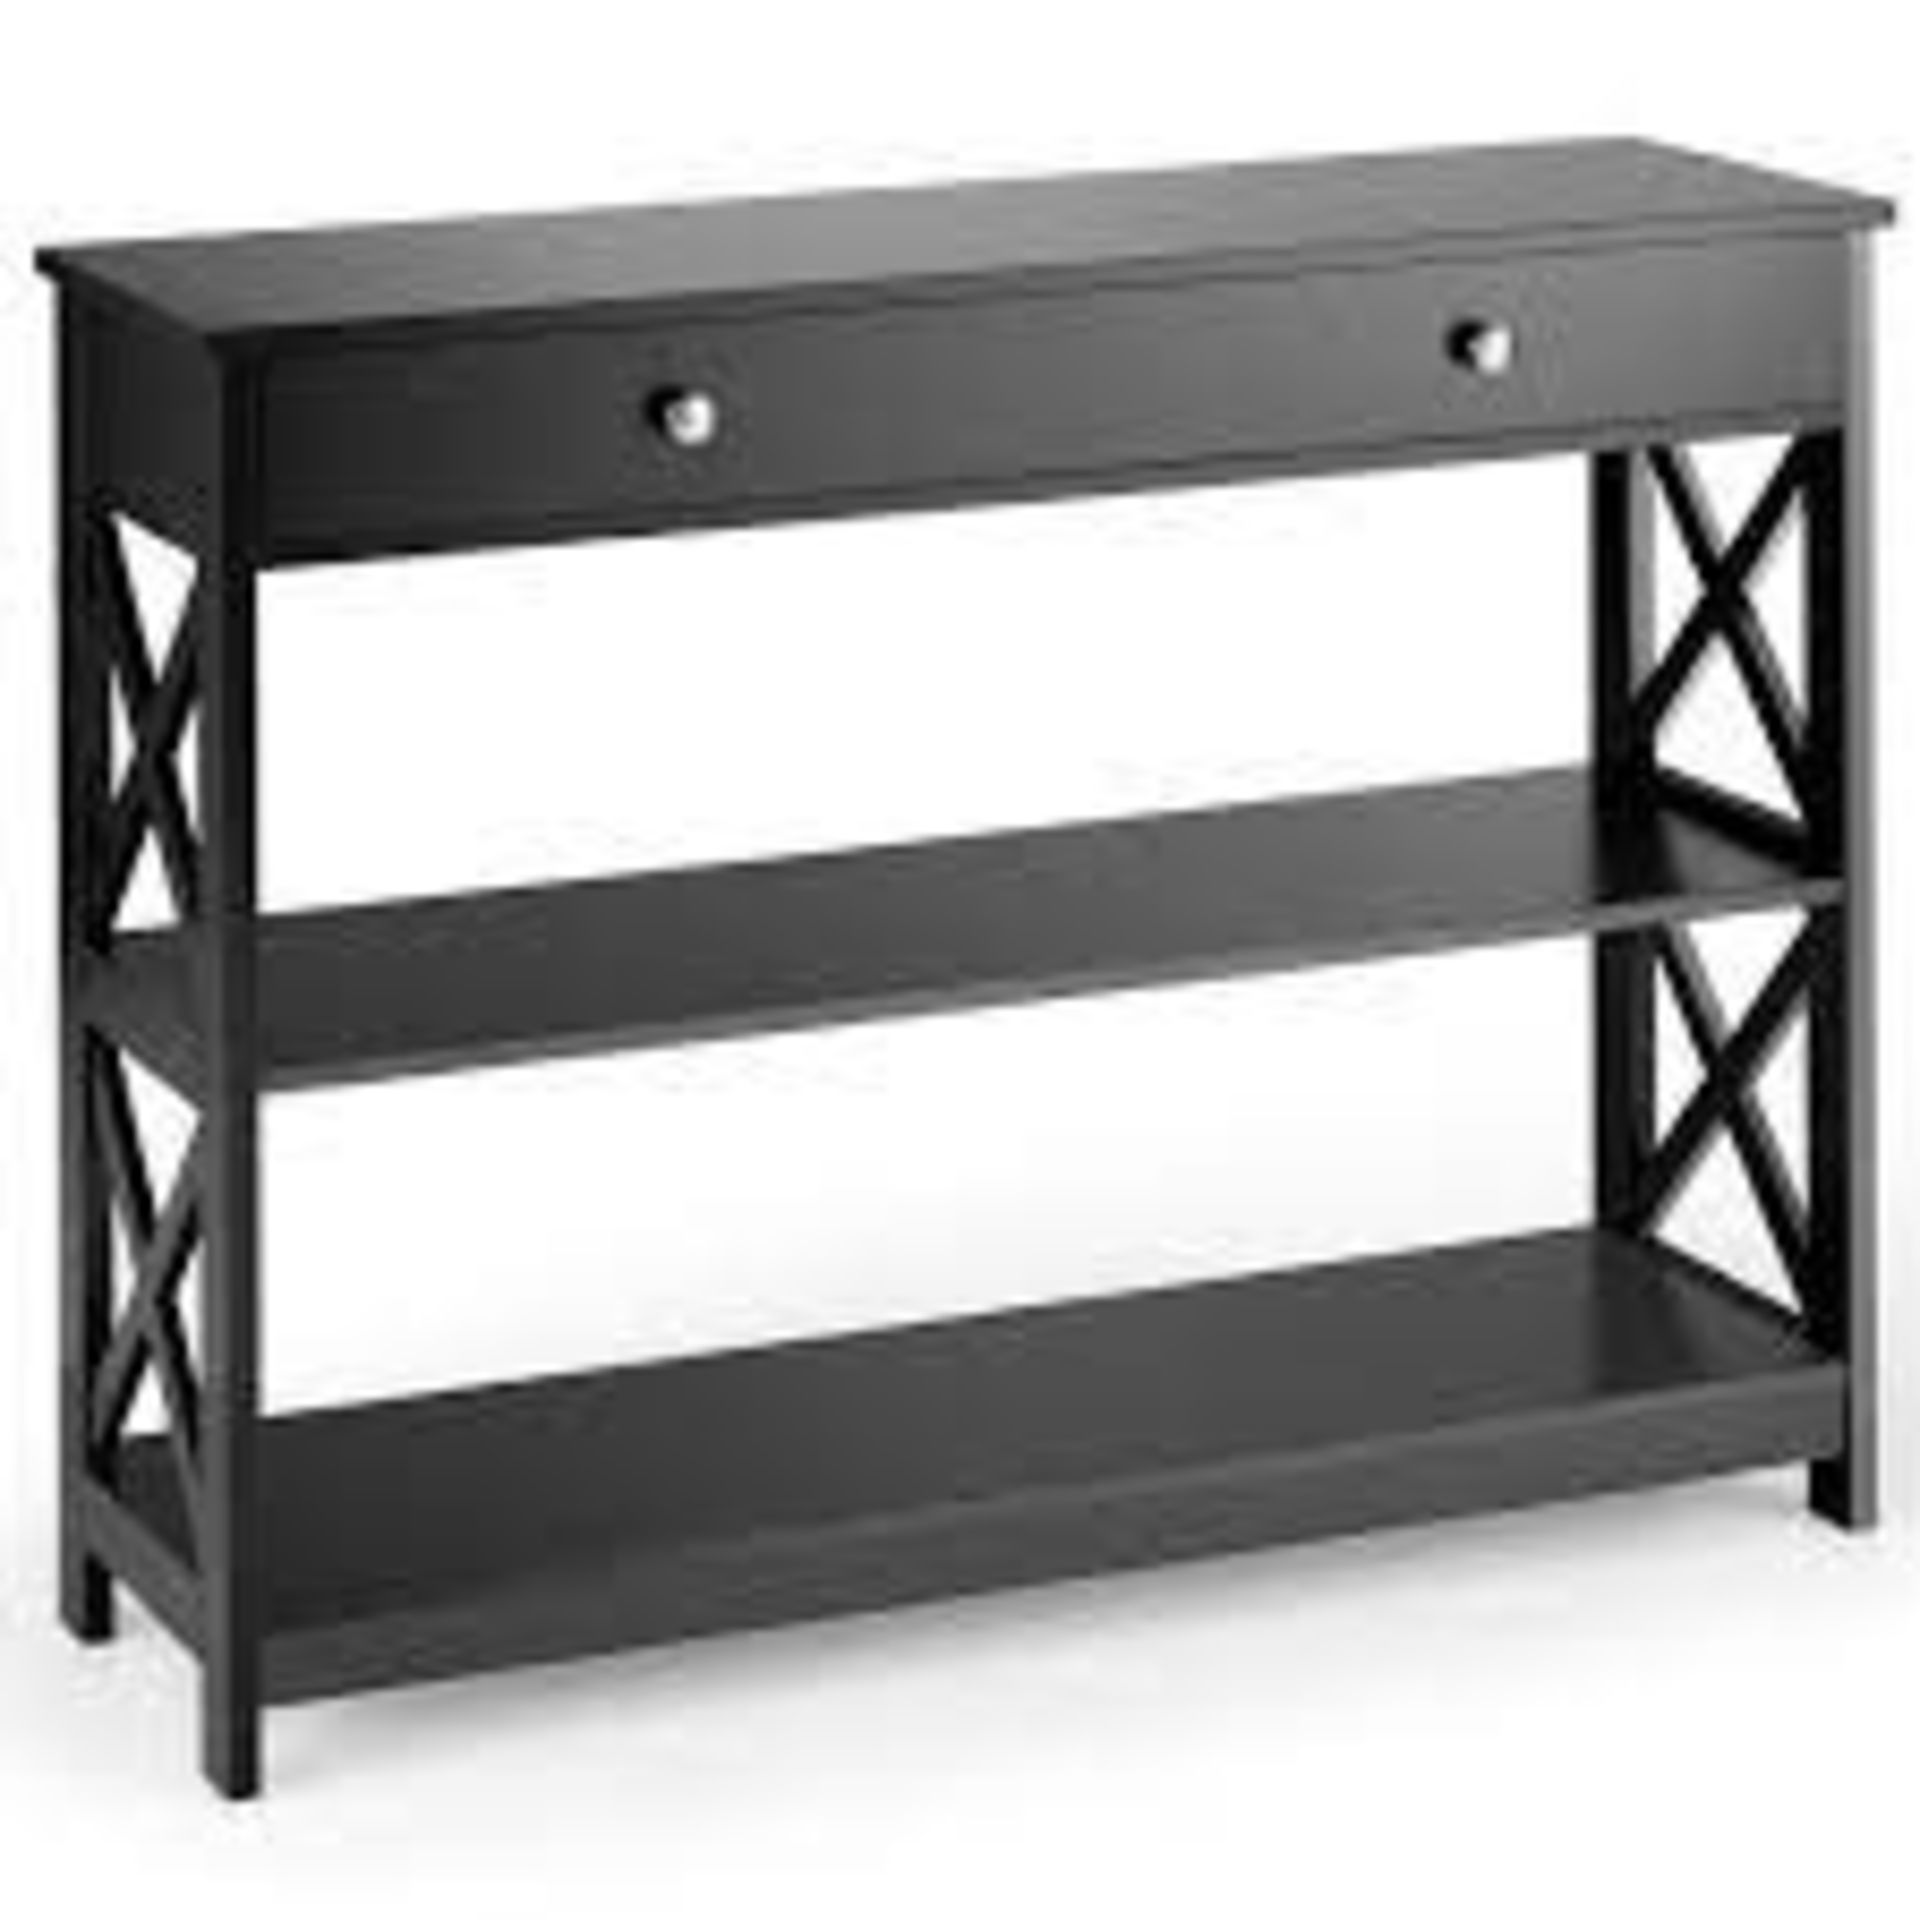 3-Tier Console Table X-Design Sofa Entryway Table with Drawer & Shelves Black - ER53